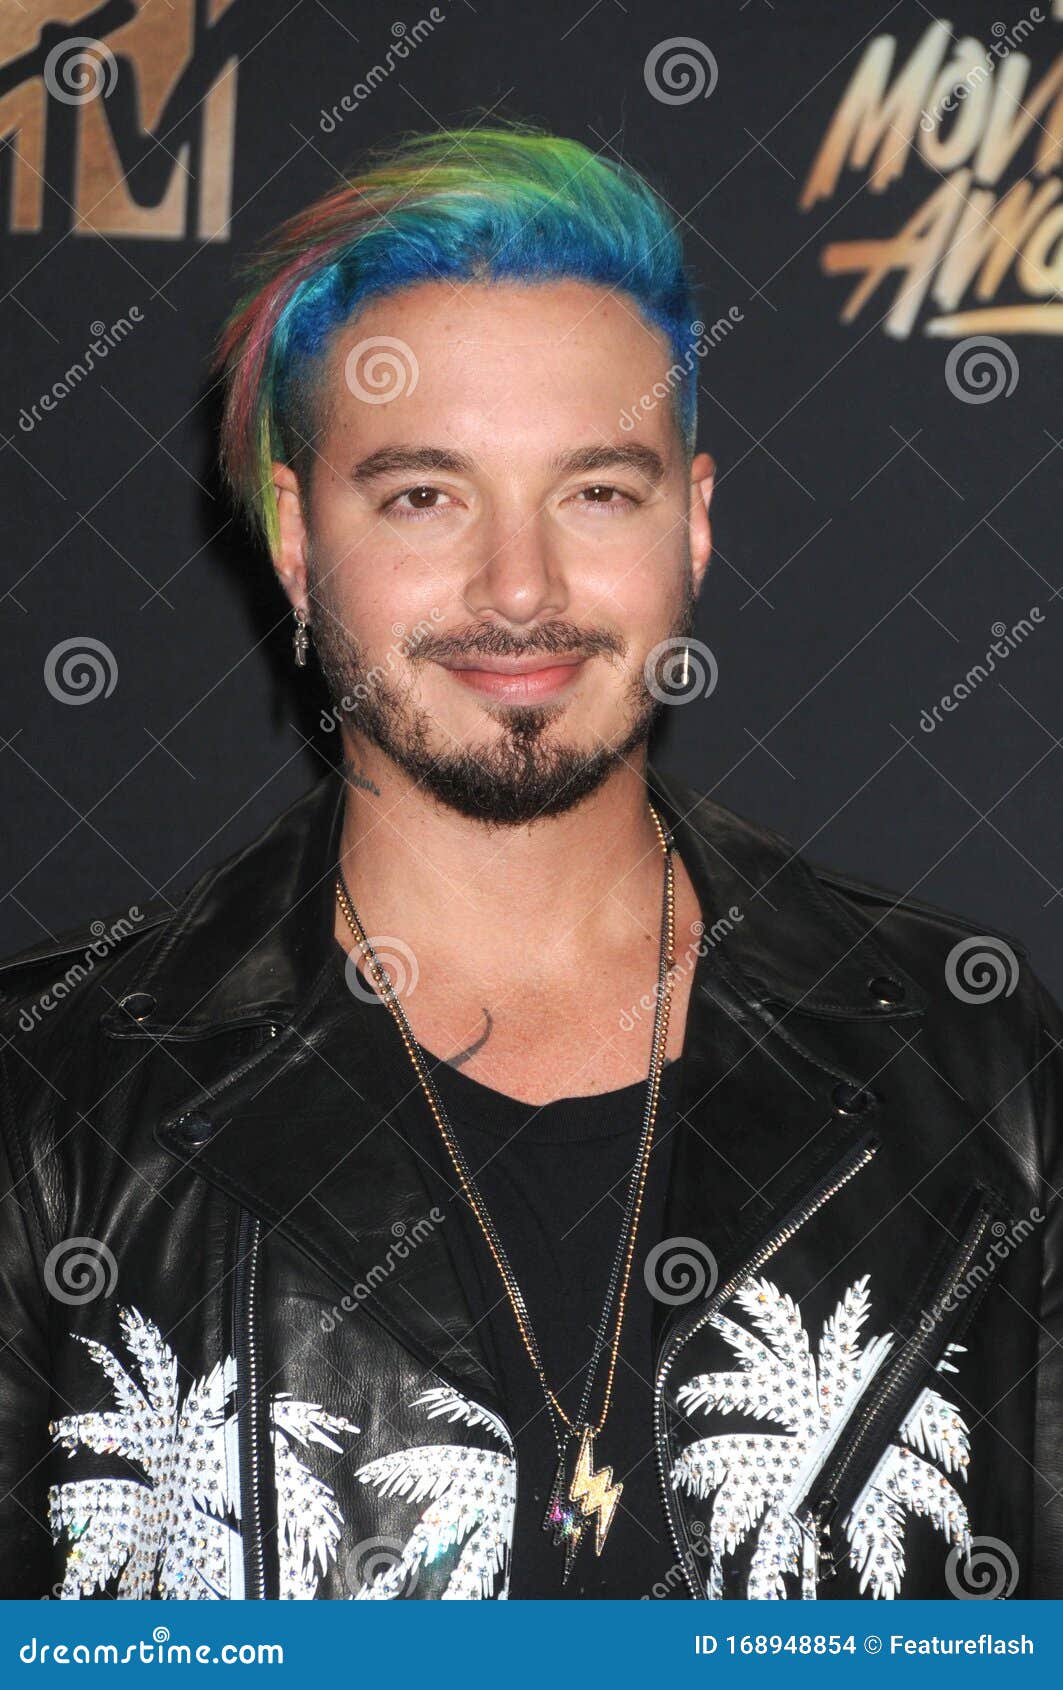 Celebrity Gossip & News | These 48 Pictures of J Balvin Are So Hot That We  Want to Take Him to 